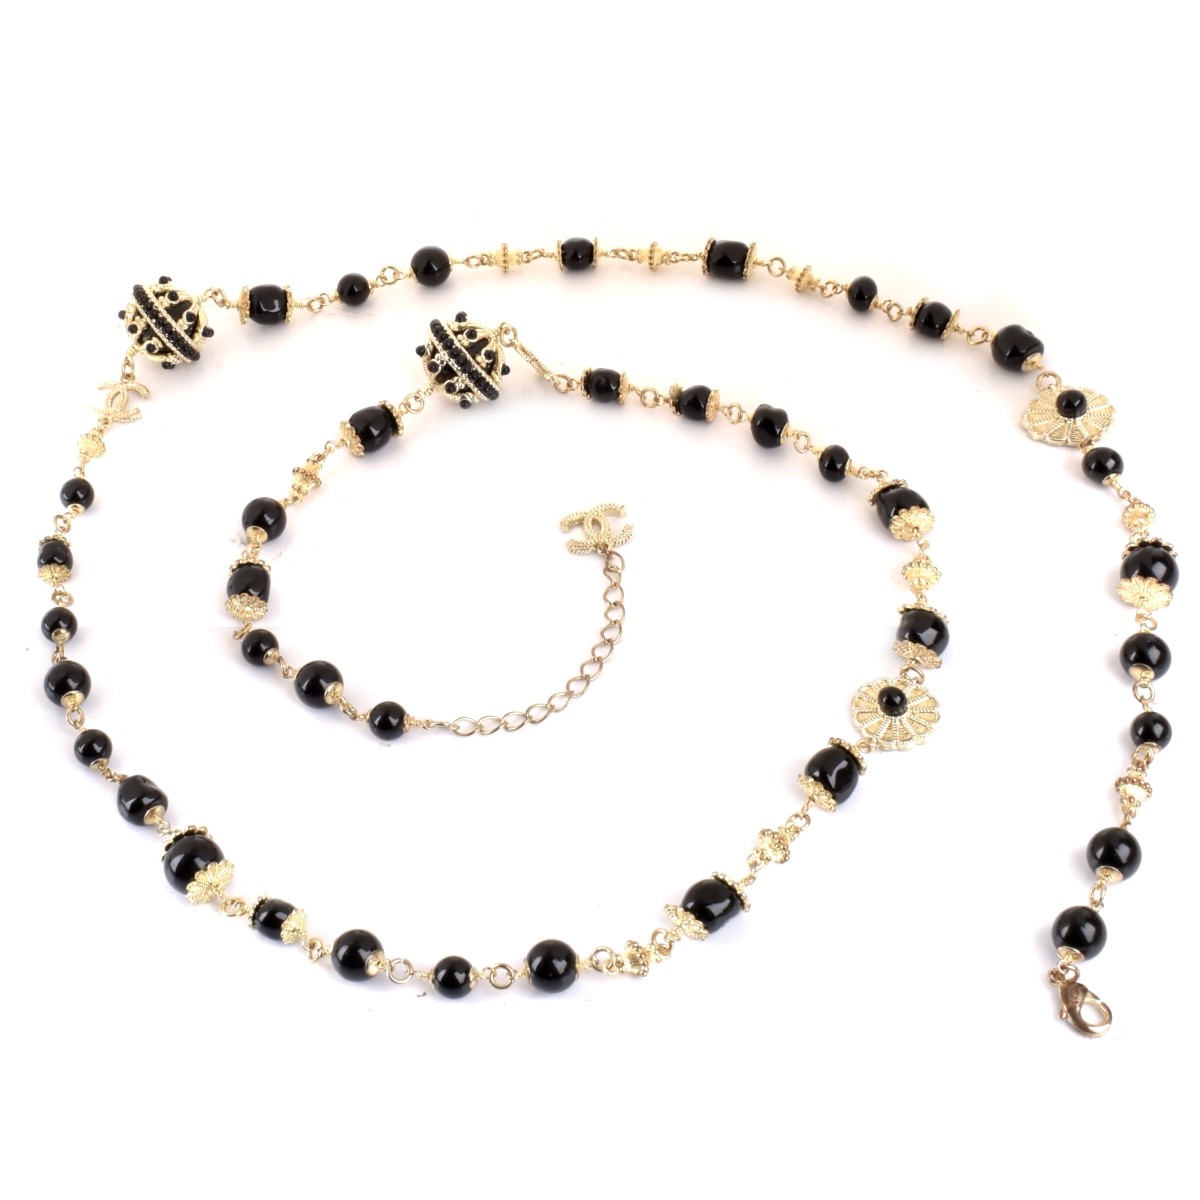 Chanel style Necklace | Kodner Auctions